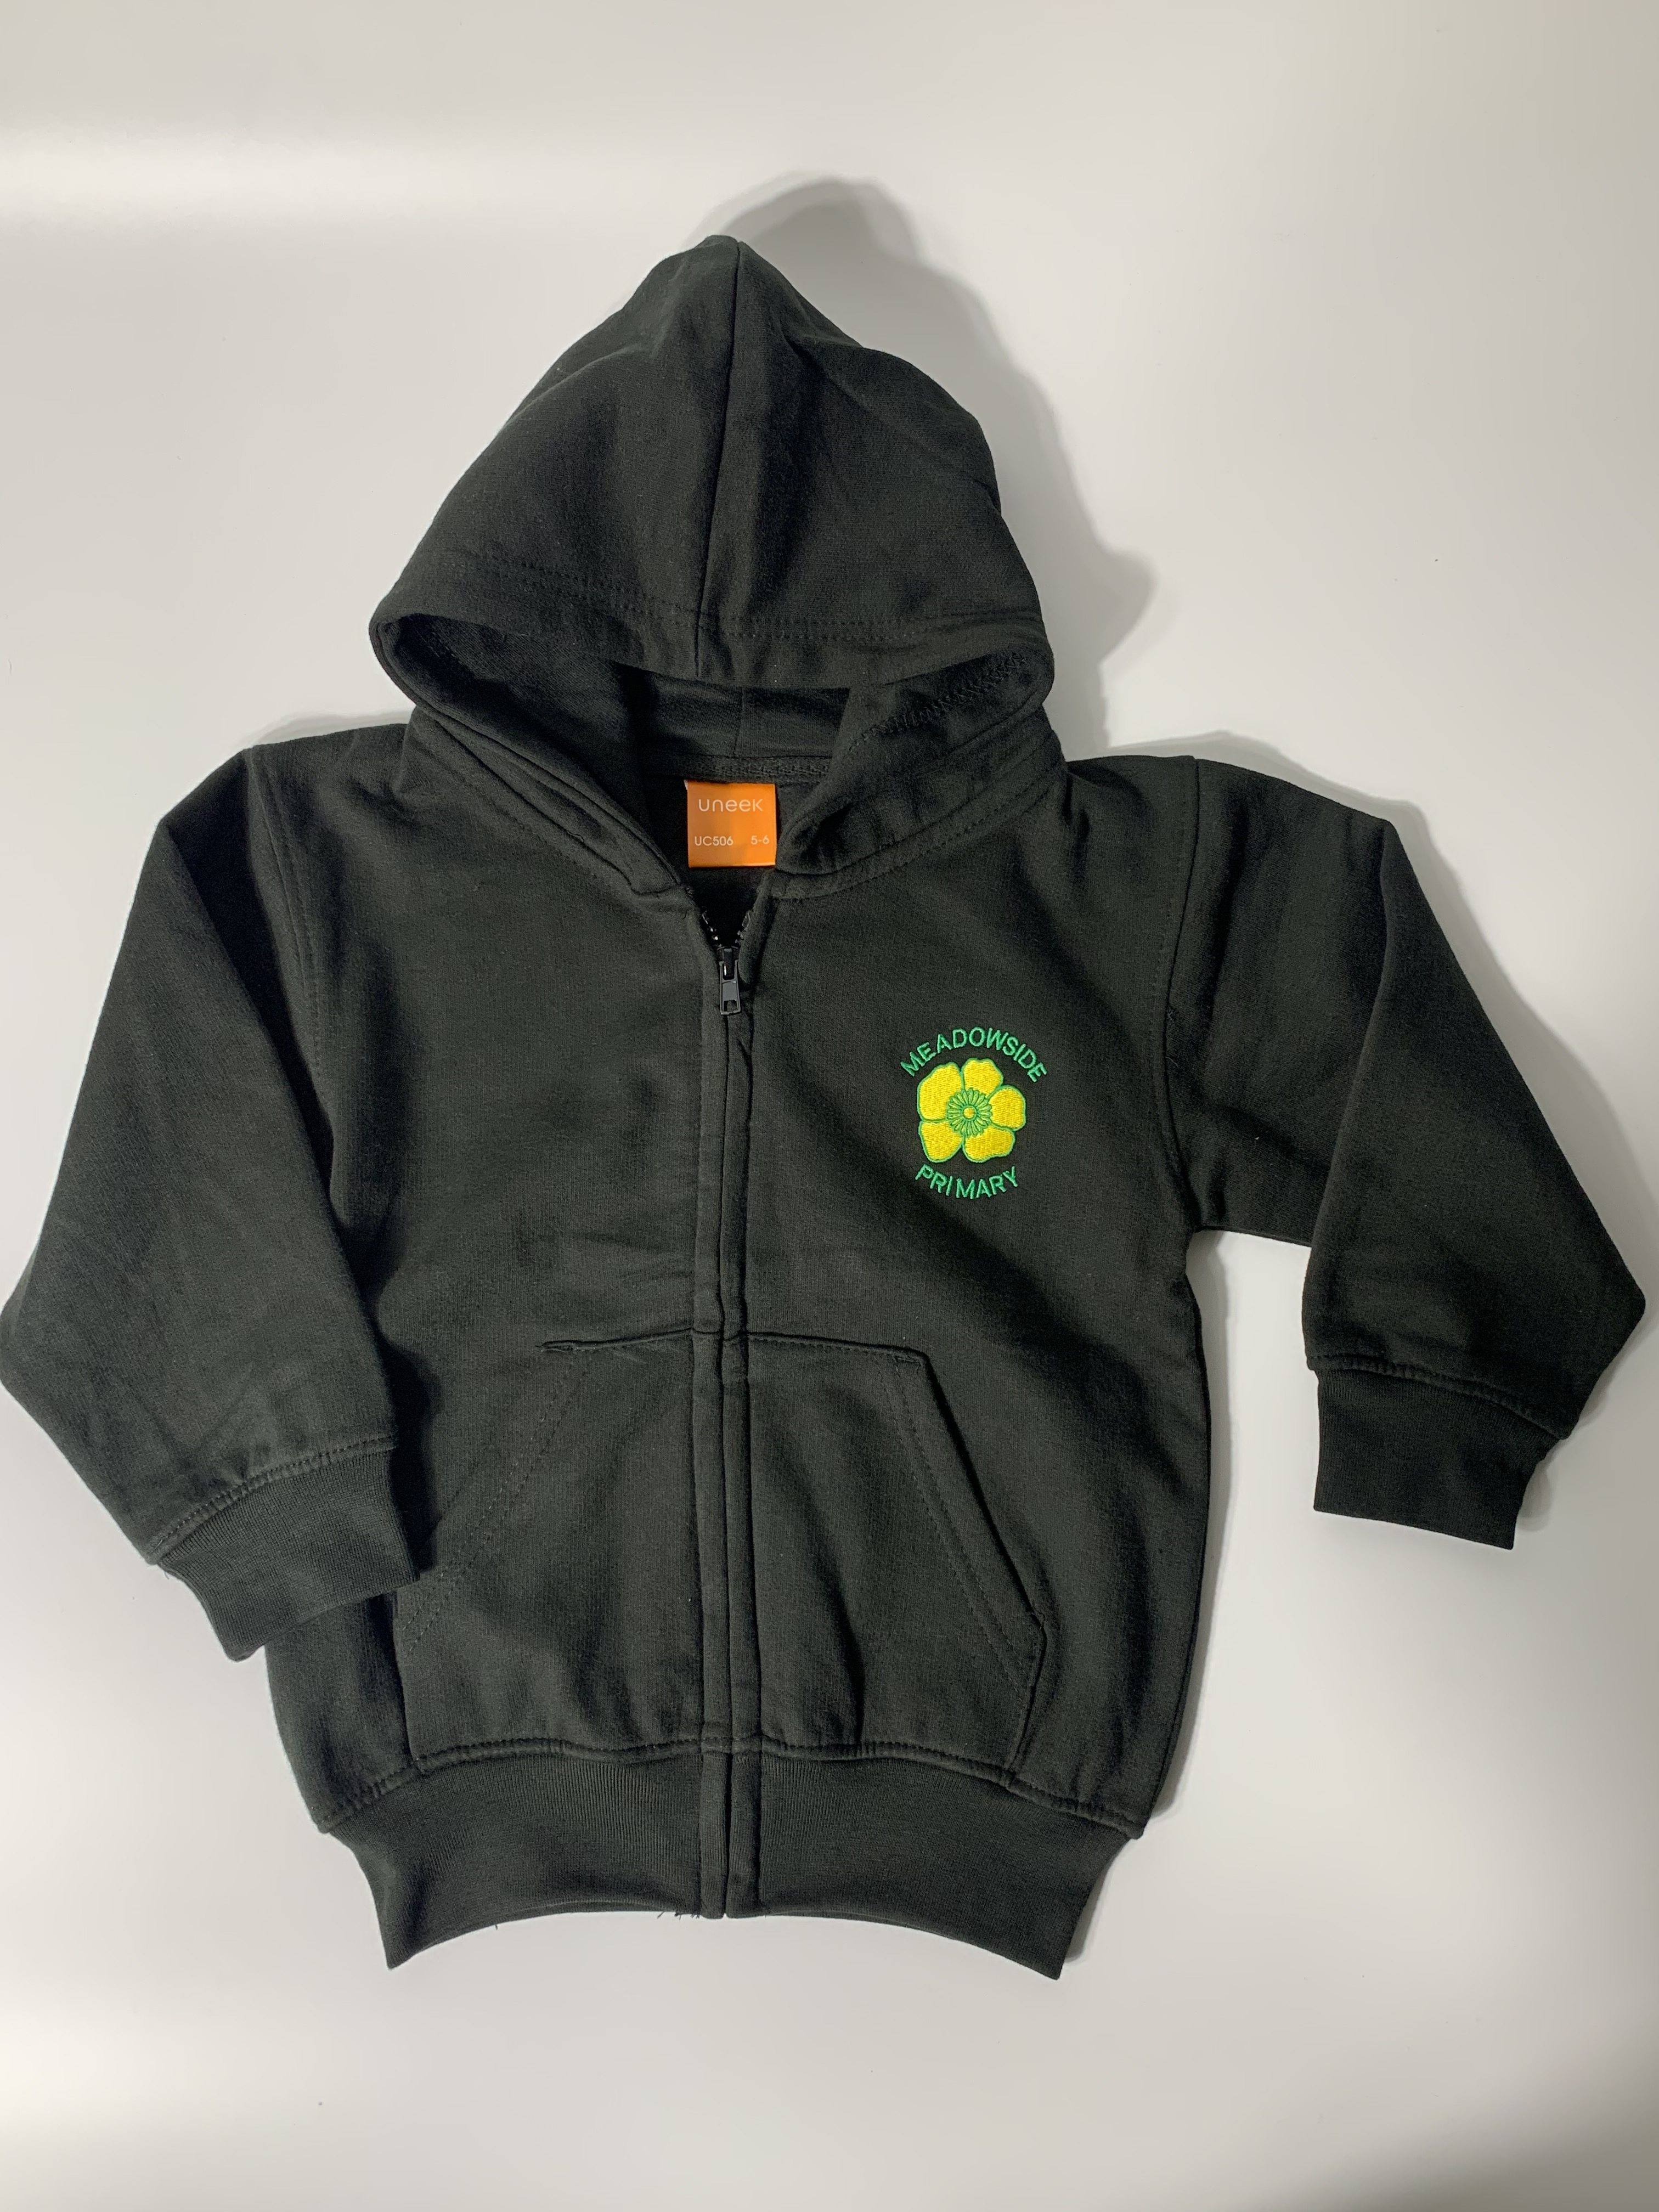 Black Zip Up Hooded Top with School Logo - Age 11-13